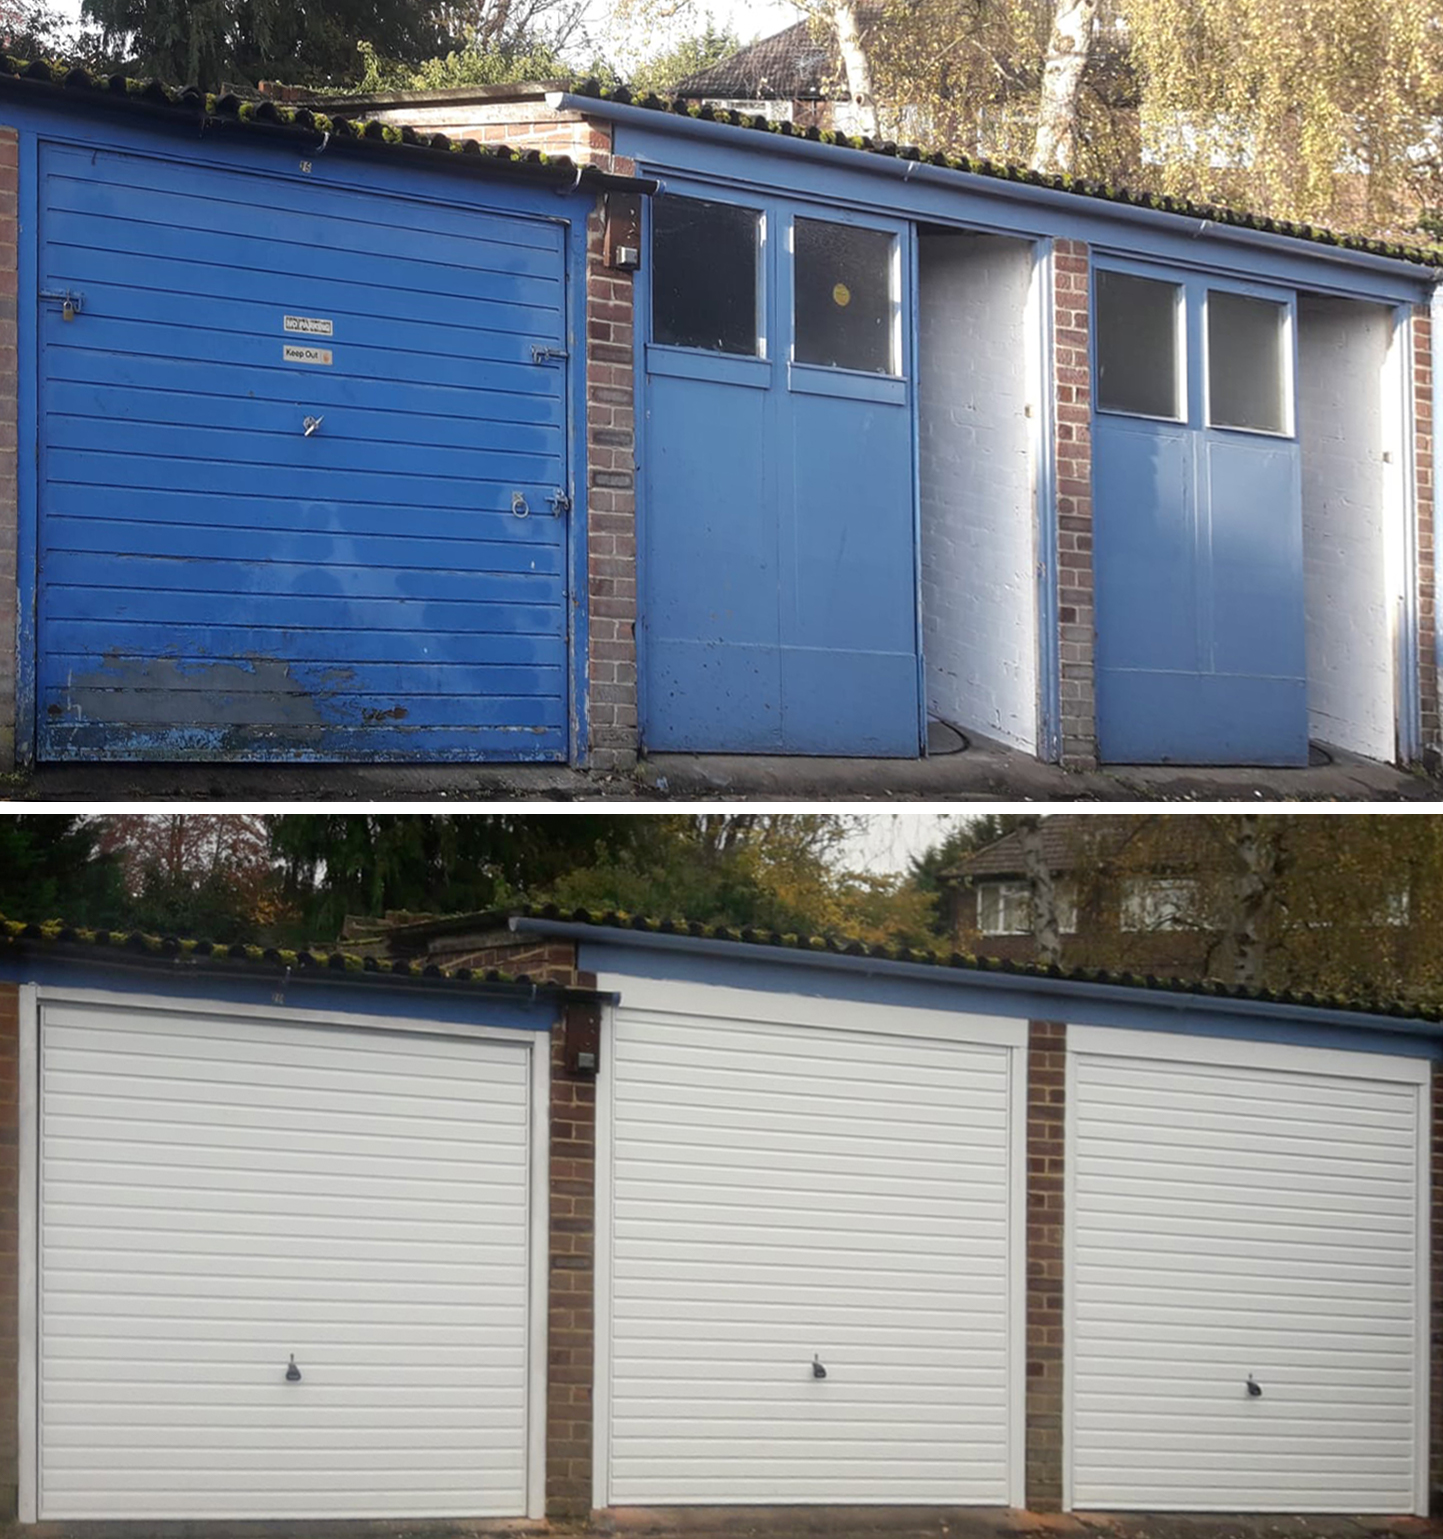 3x Garador Horizon Canopy Style Up & Over Garage Doors finished in Traffic White